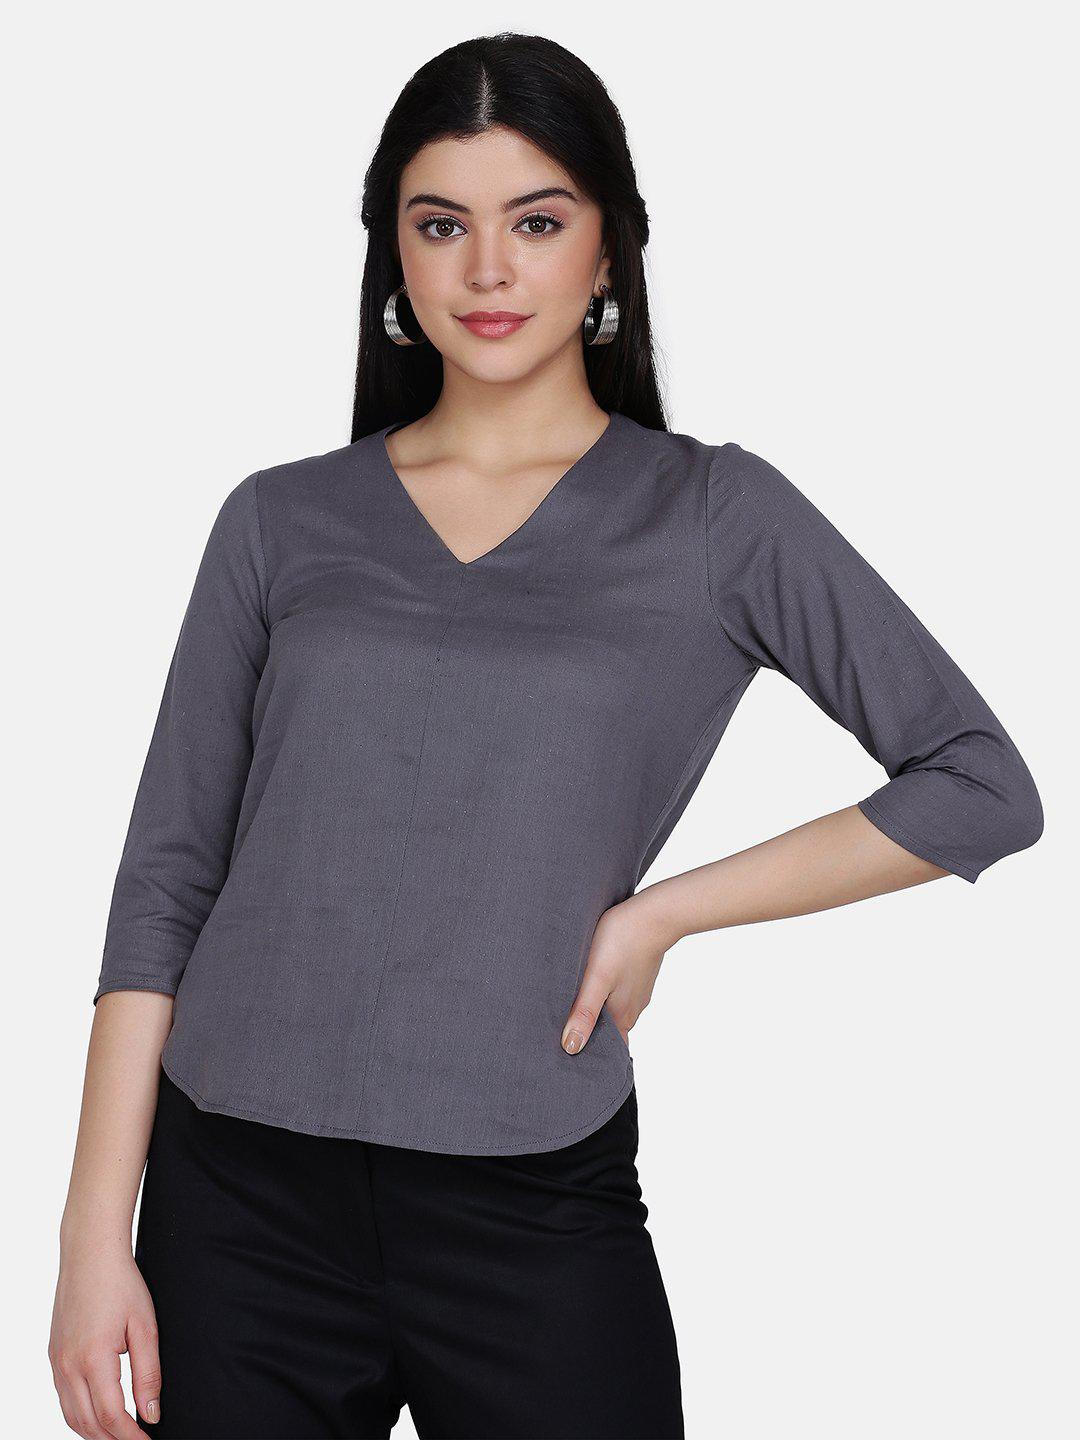 Cotton Top For Women - Charcoal Grey